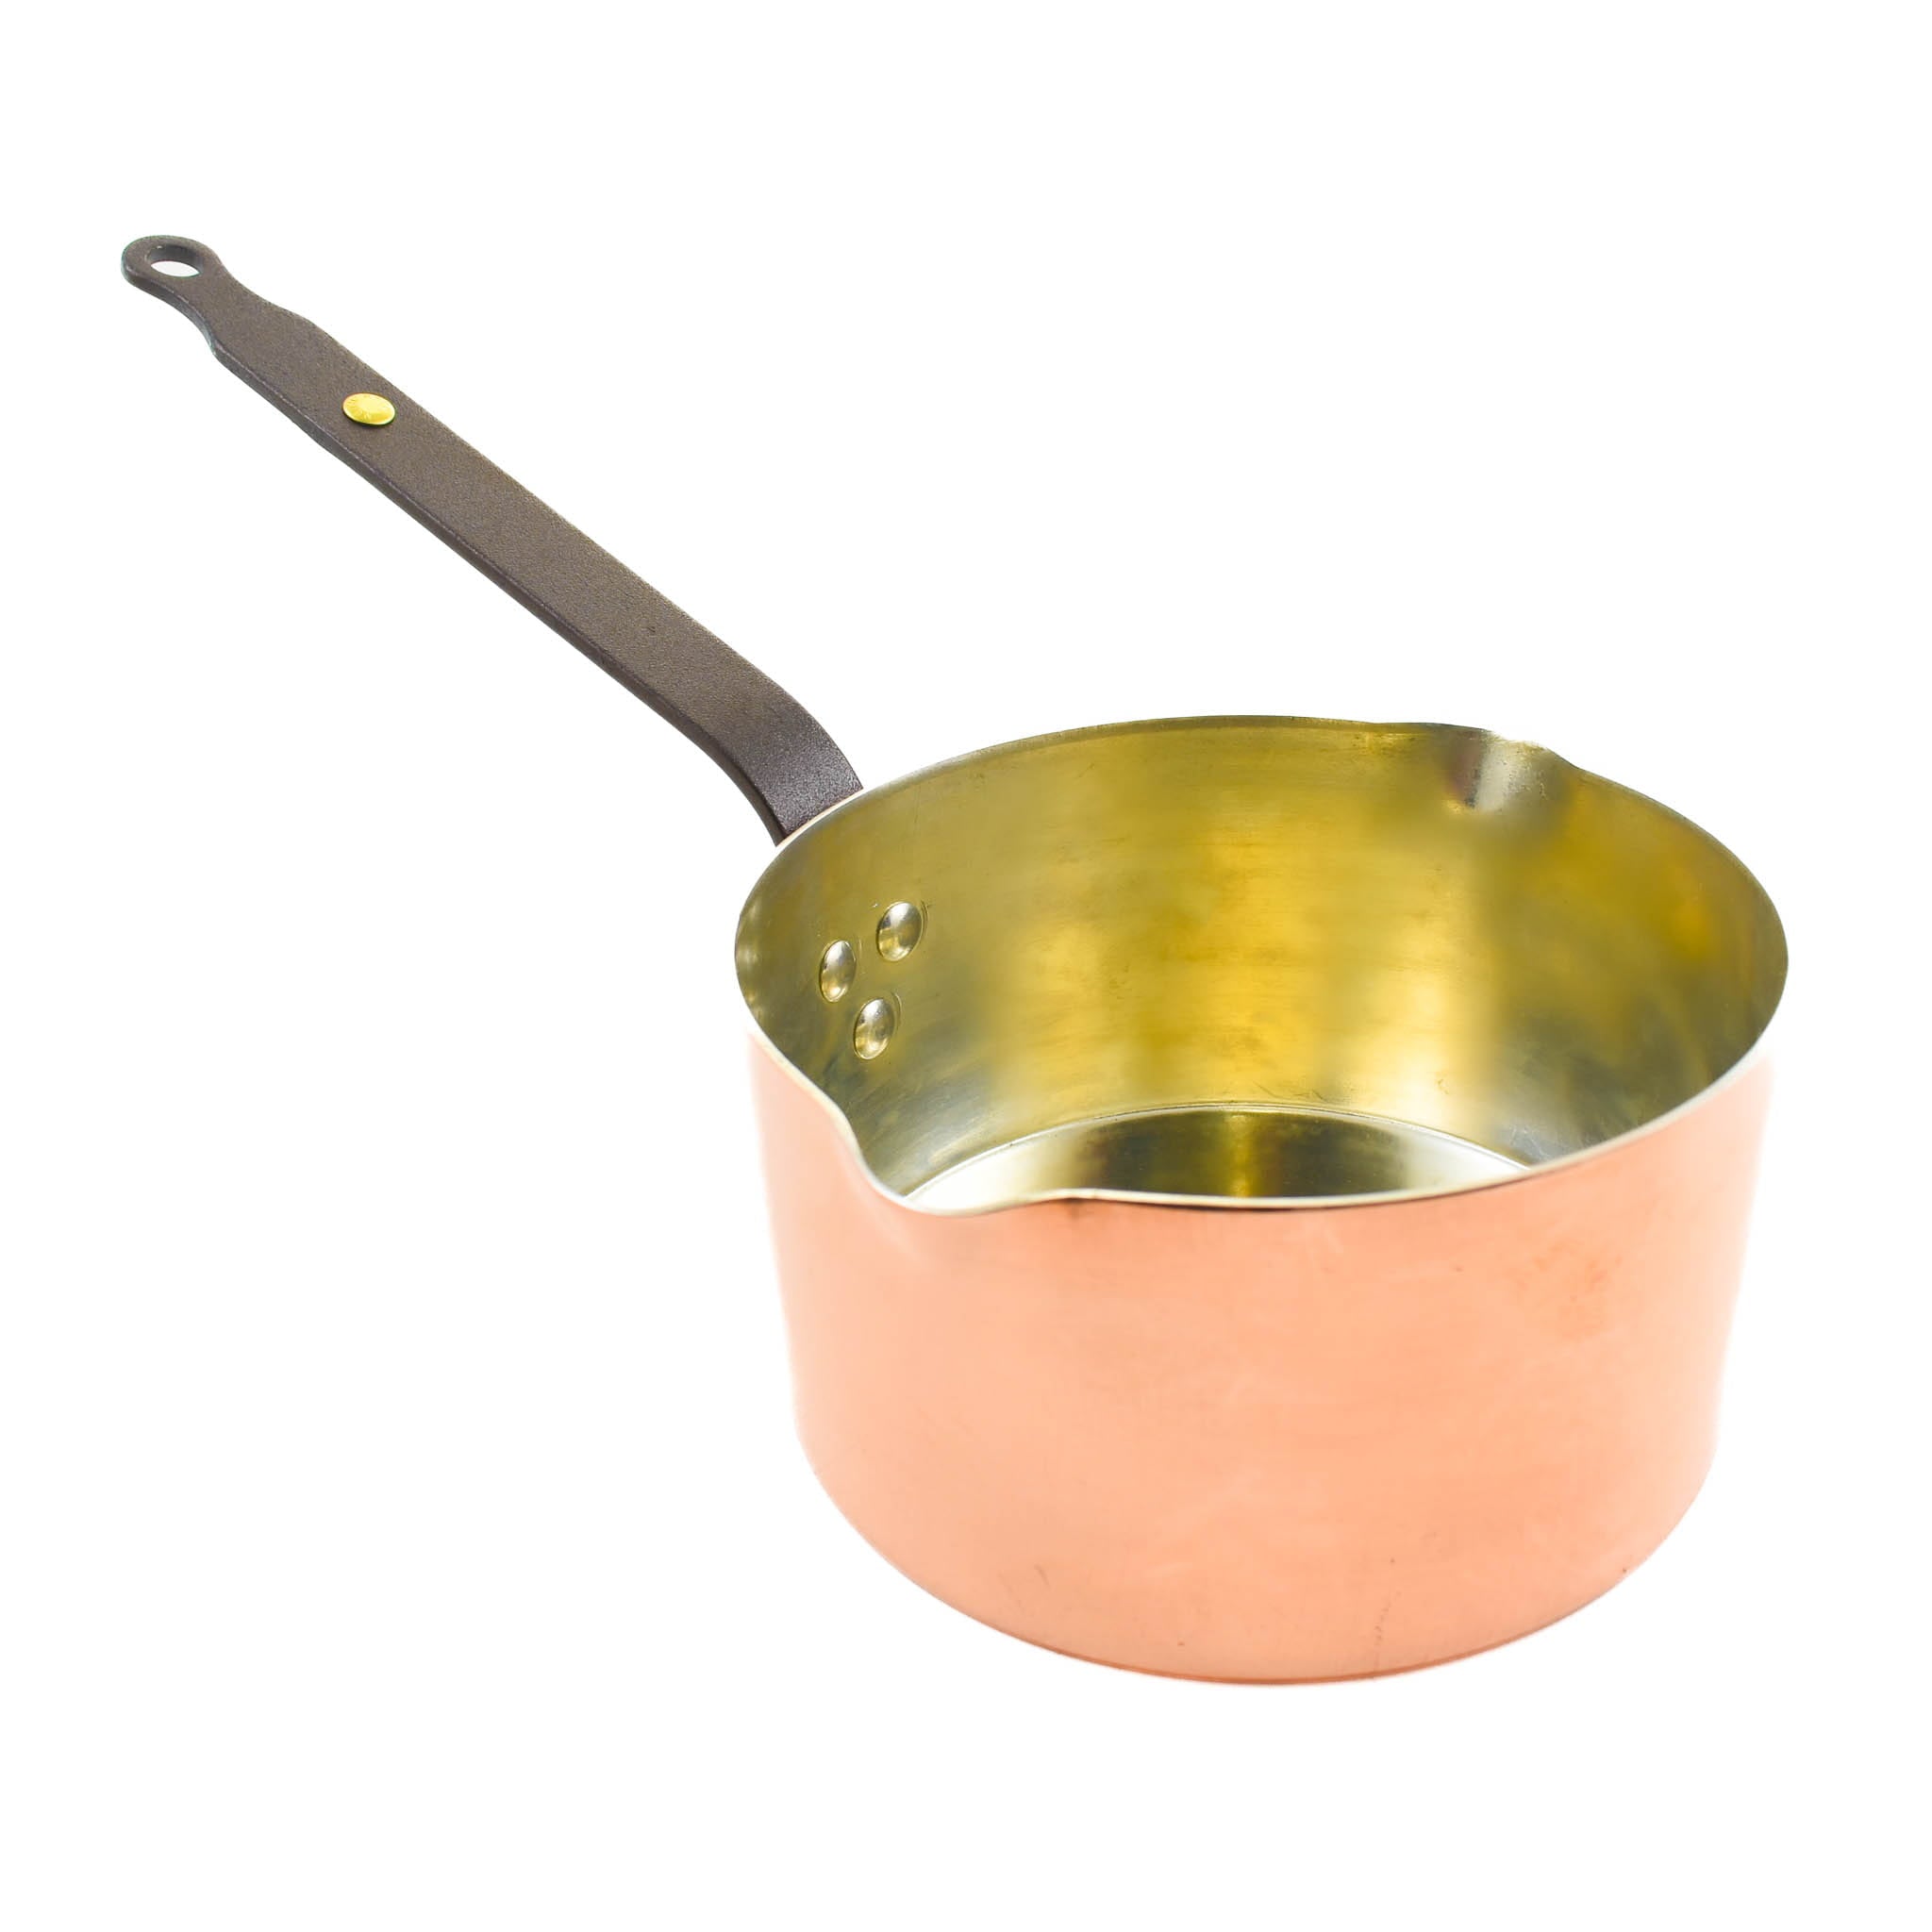 Buy Netherton Foundry Oven Safe Frying Pan - Sous Chef Online Shop